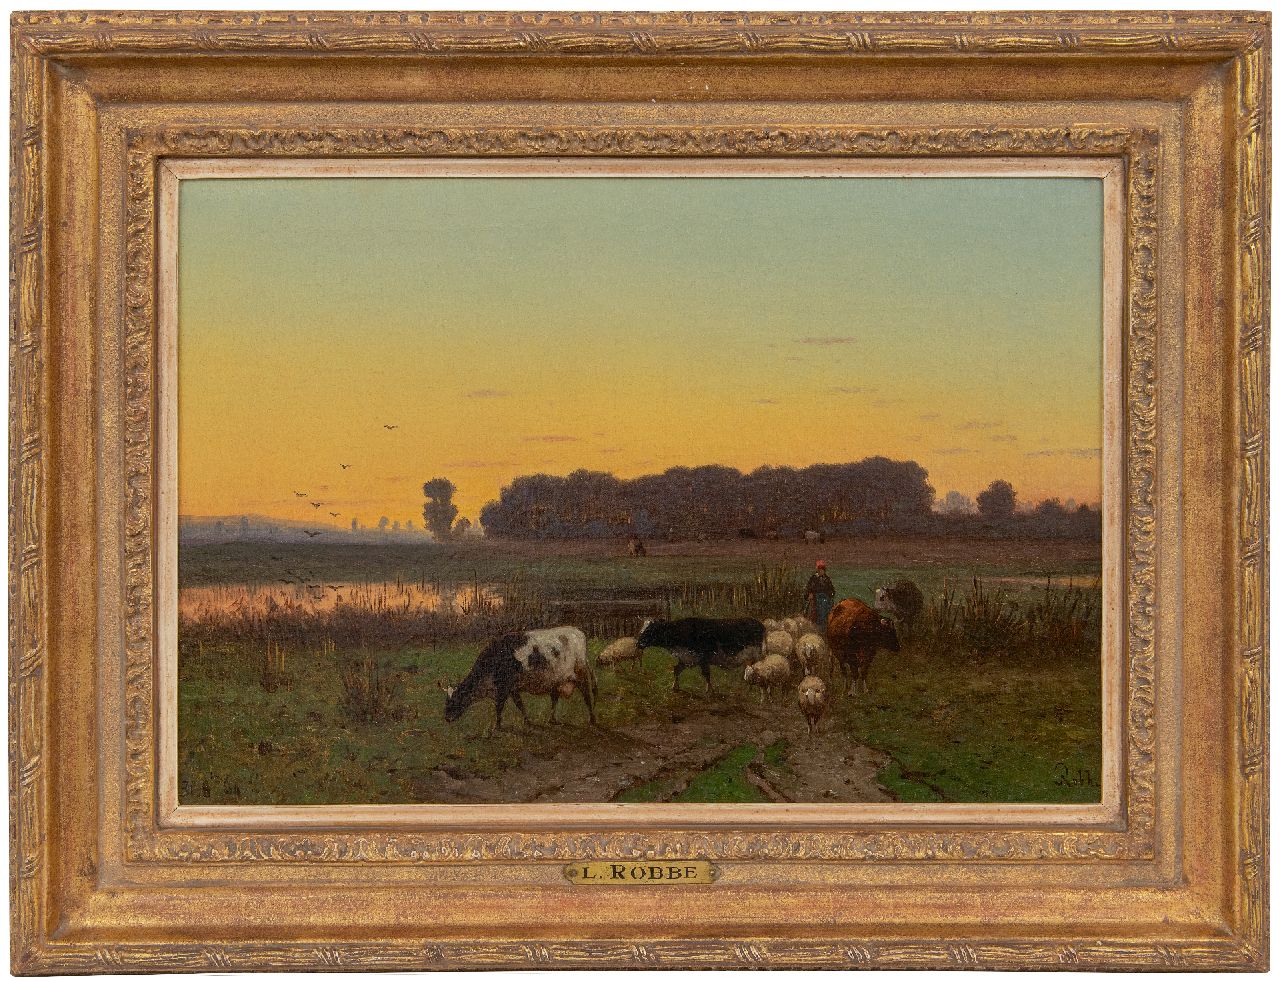 Robbe H.A.  | Henri Alexander Robbe | Paintings offered for sale | Shepherdess and cattle on their way home, oil on canvas 34.1 x 49.8 cm, signed l.r.